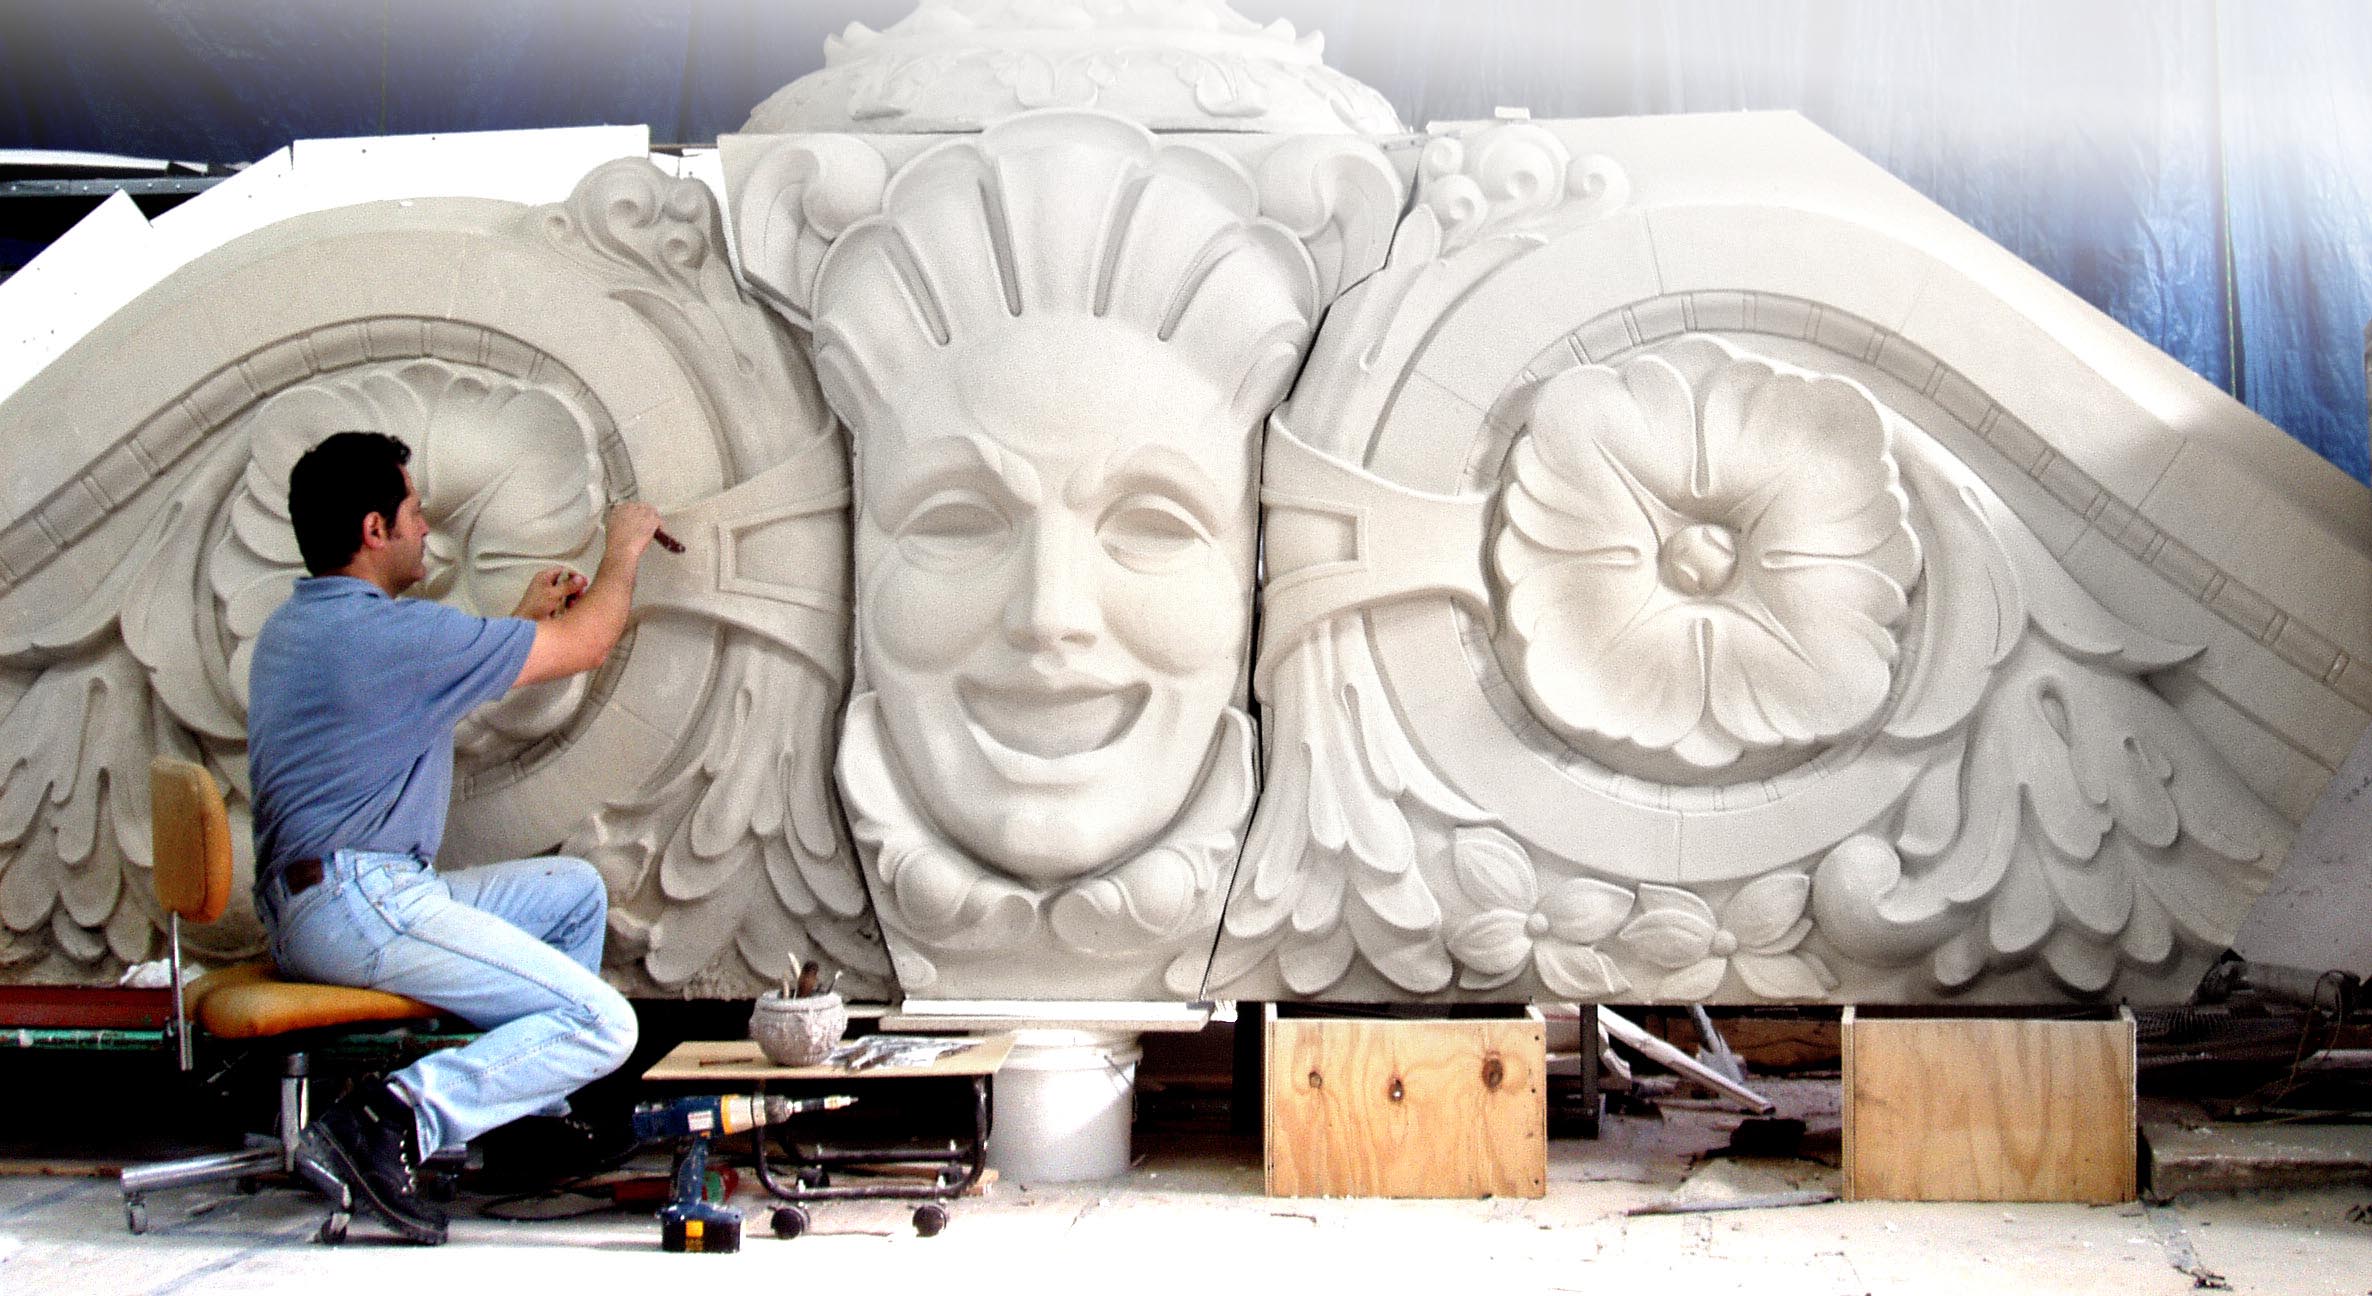  A sculptor working on a plaster sculptural element for Sheas Theatre in Buffalo NY 